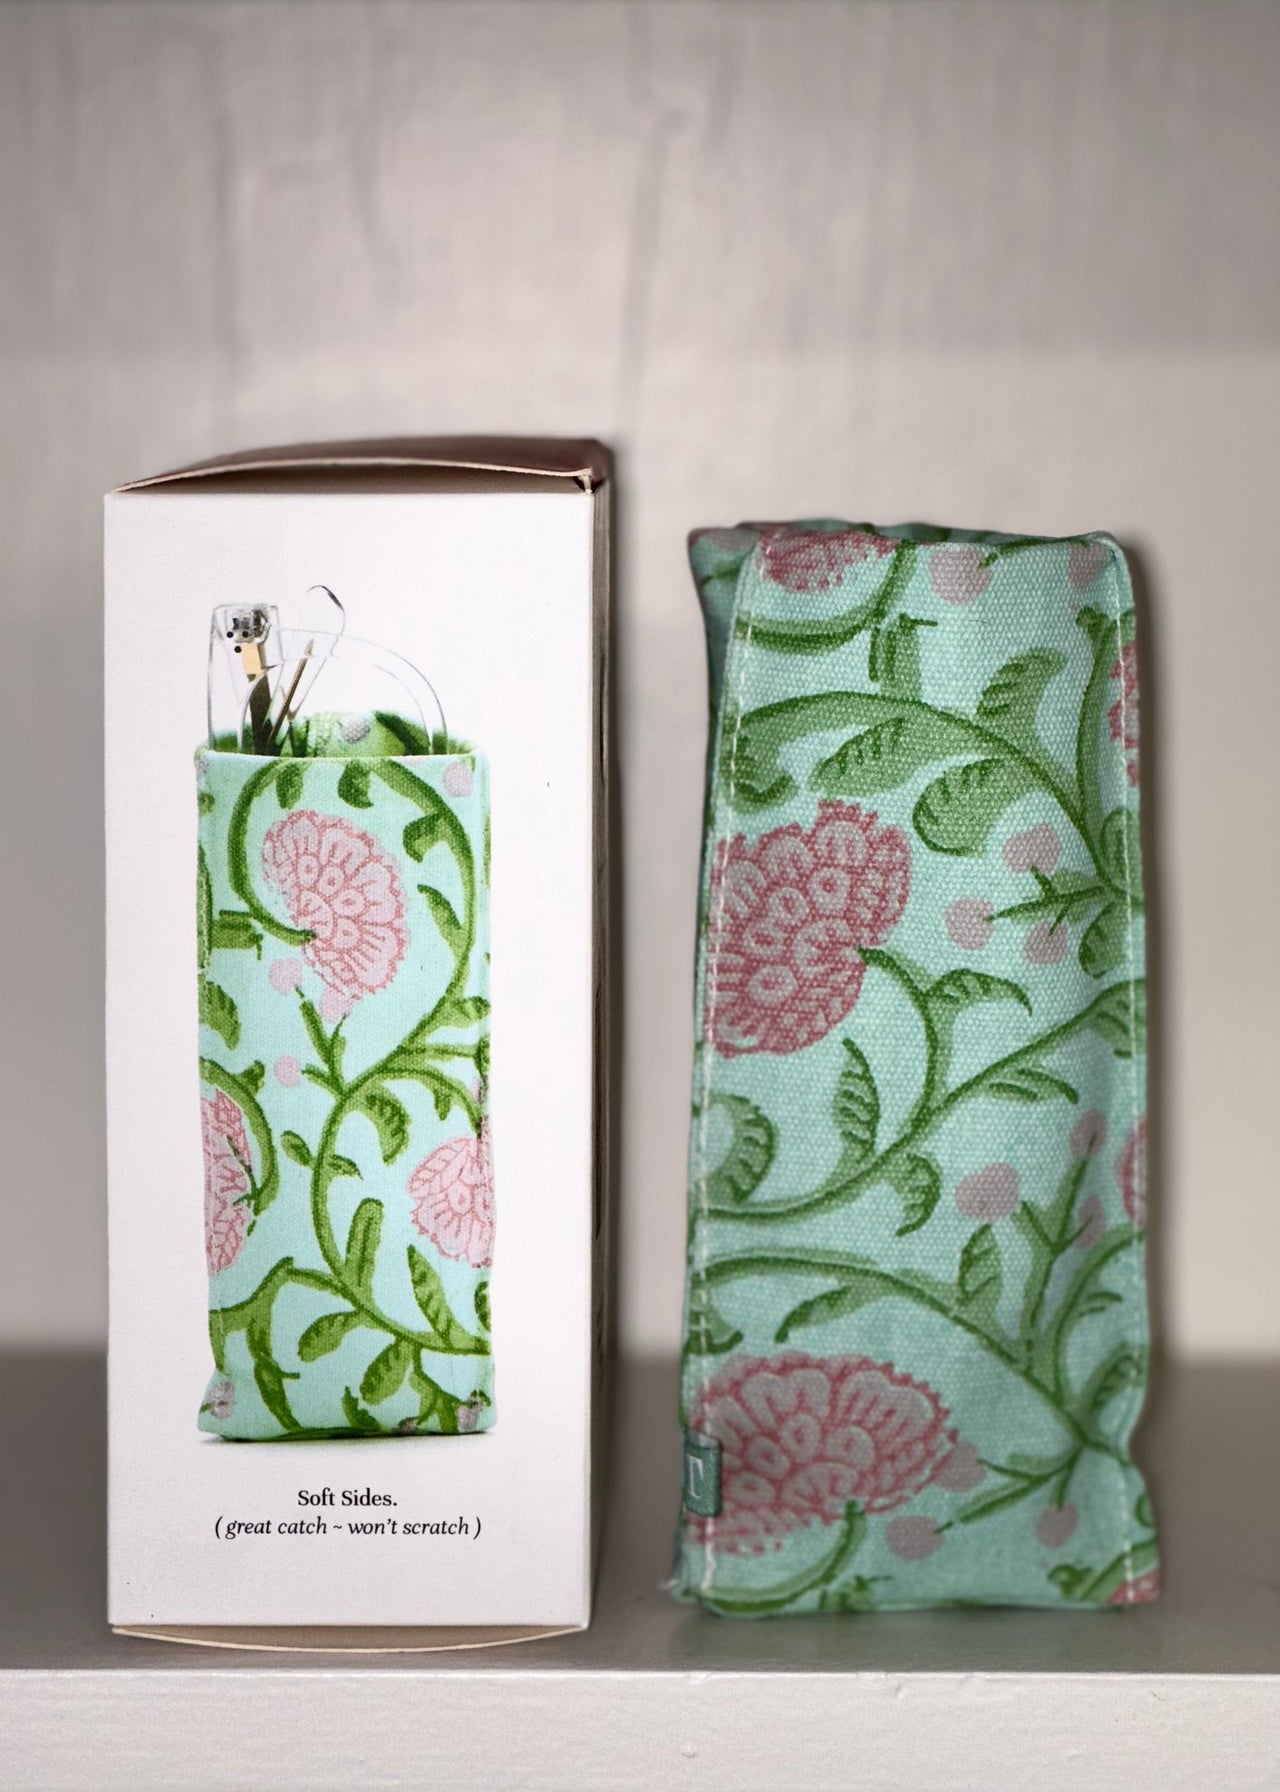 Looking Good - Floral Block Print Two’s Company holder Green